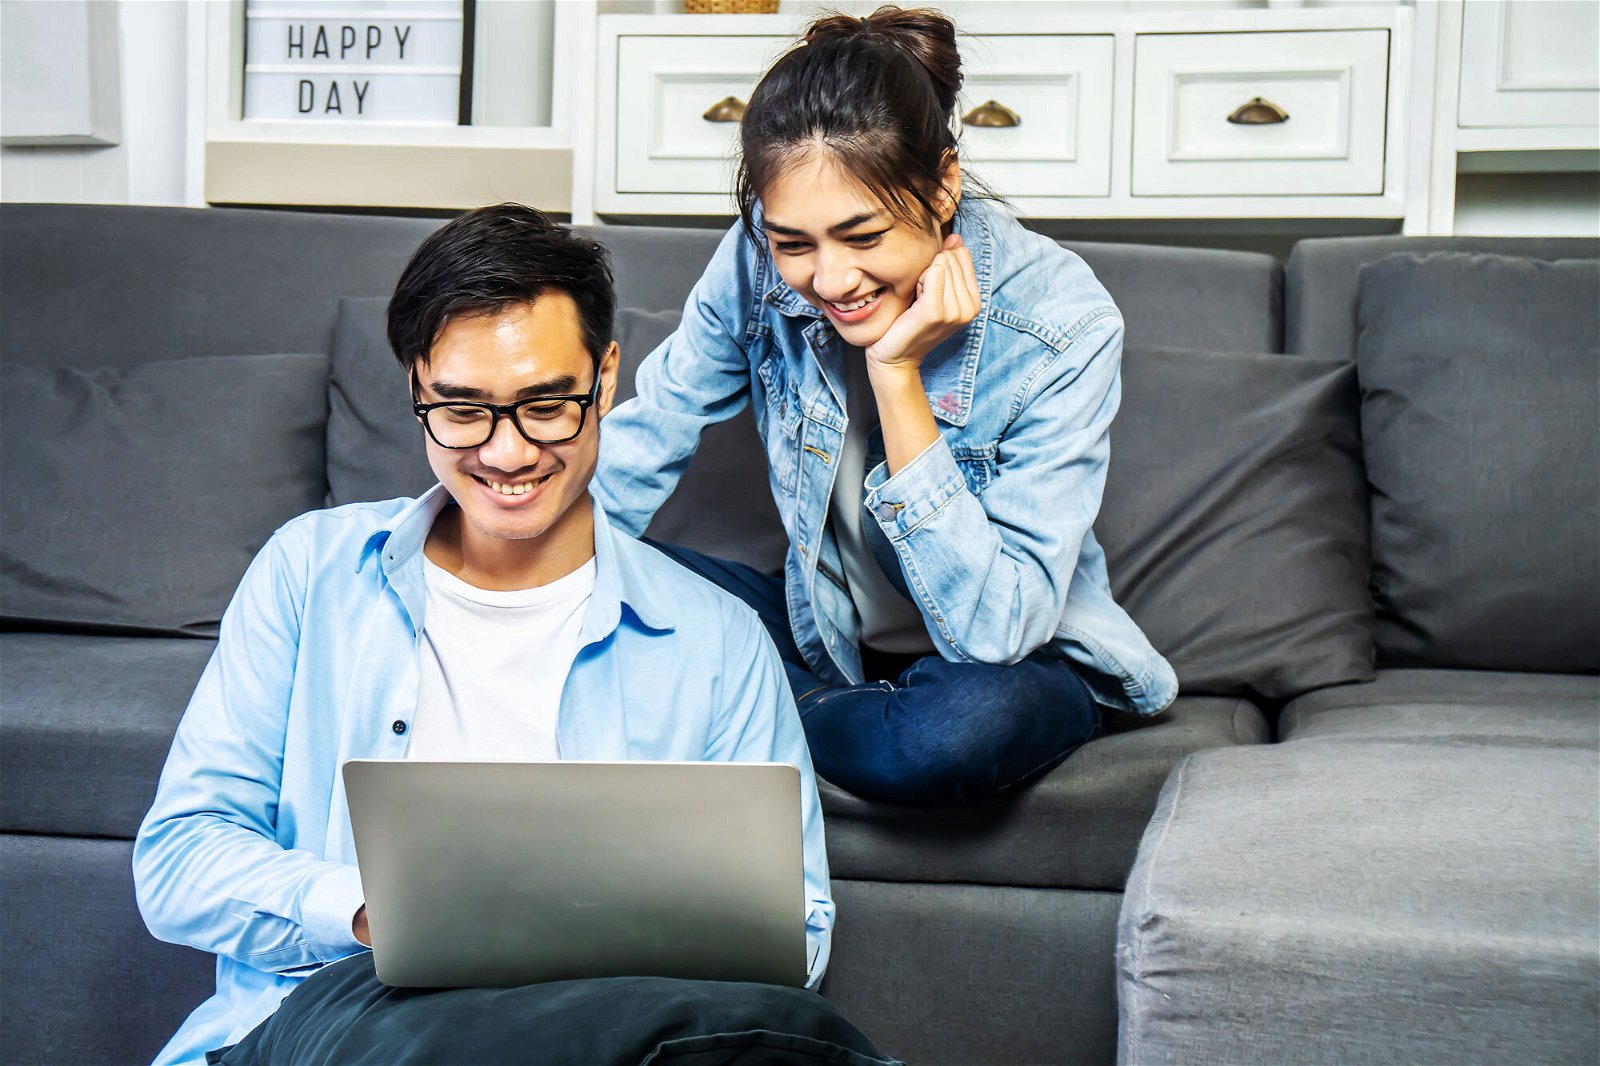 a man and woman sitting on a couch looking at a laptop.